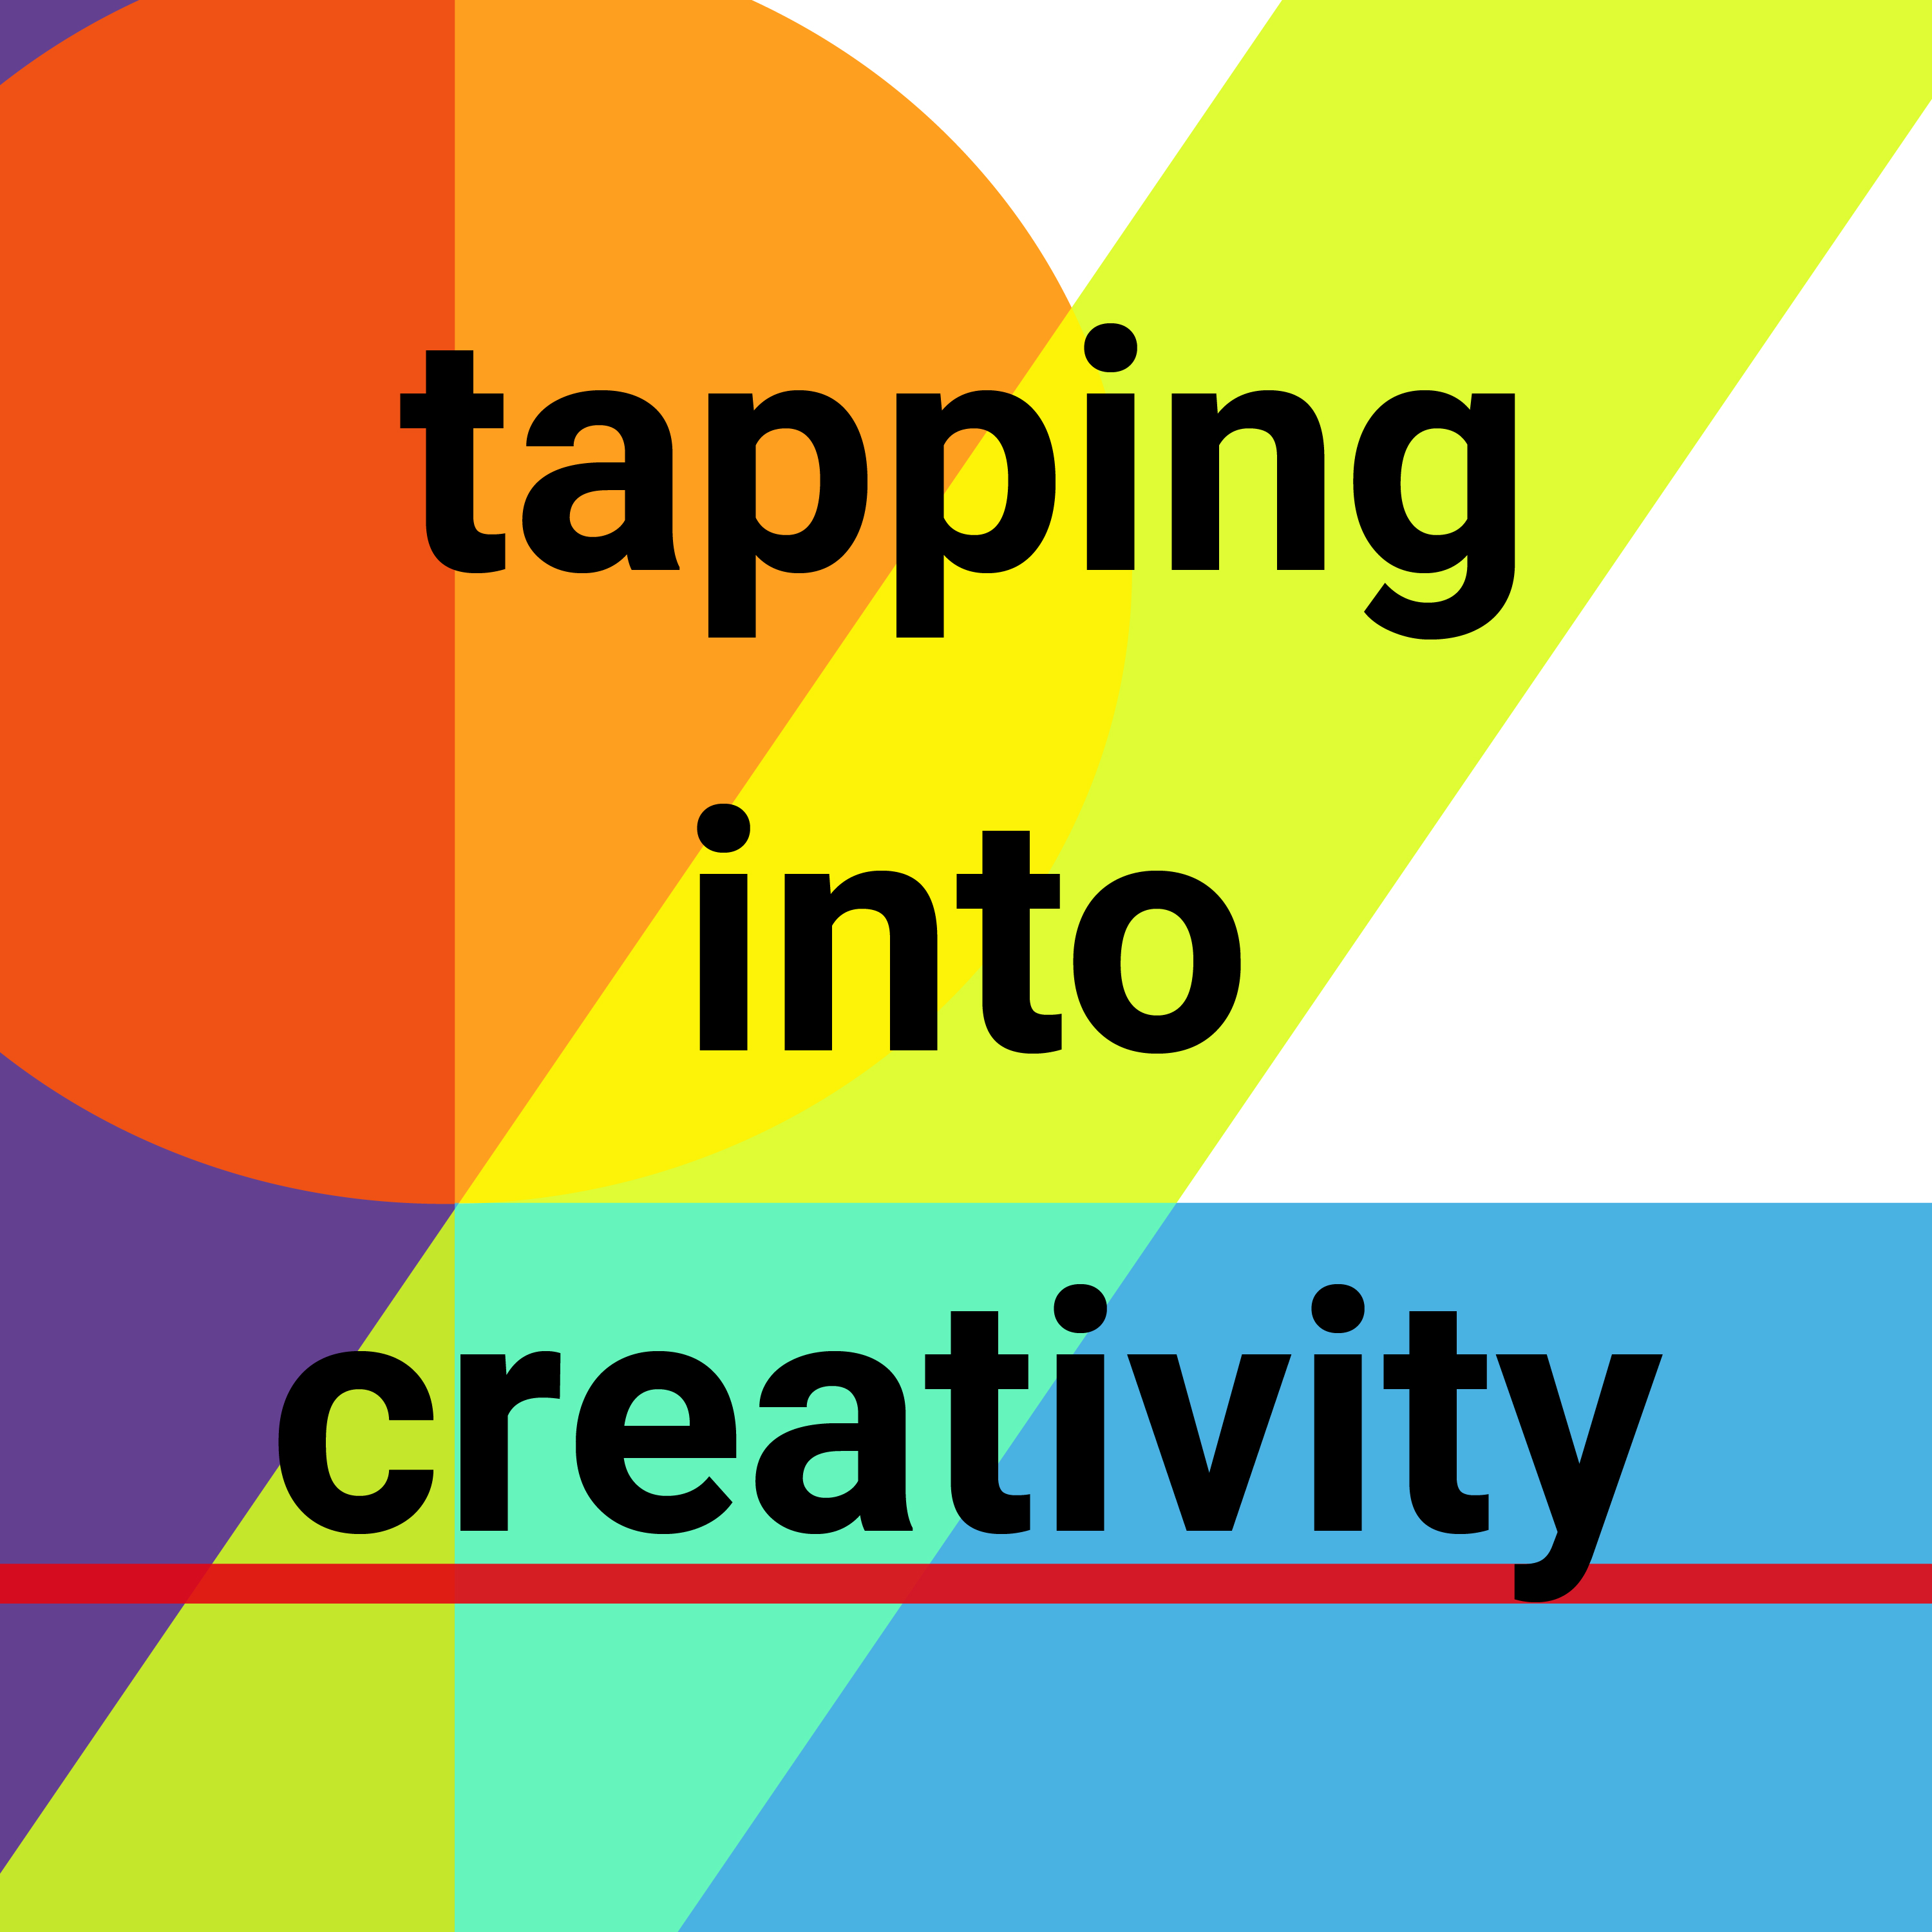 tapping into creativity